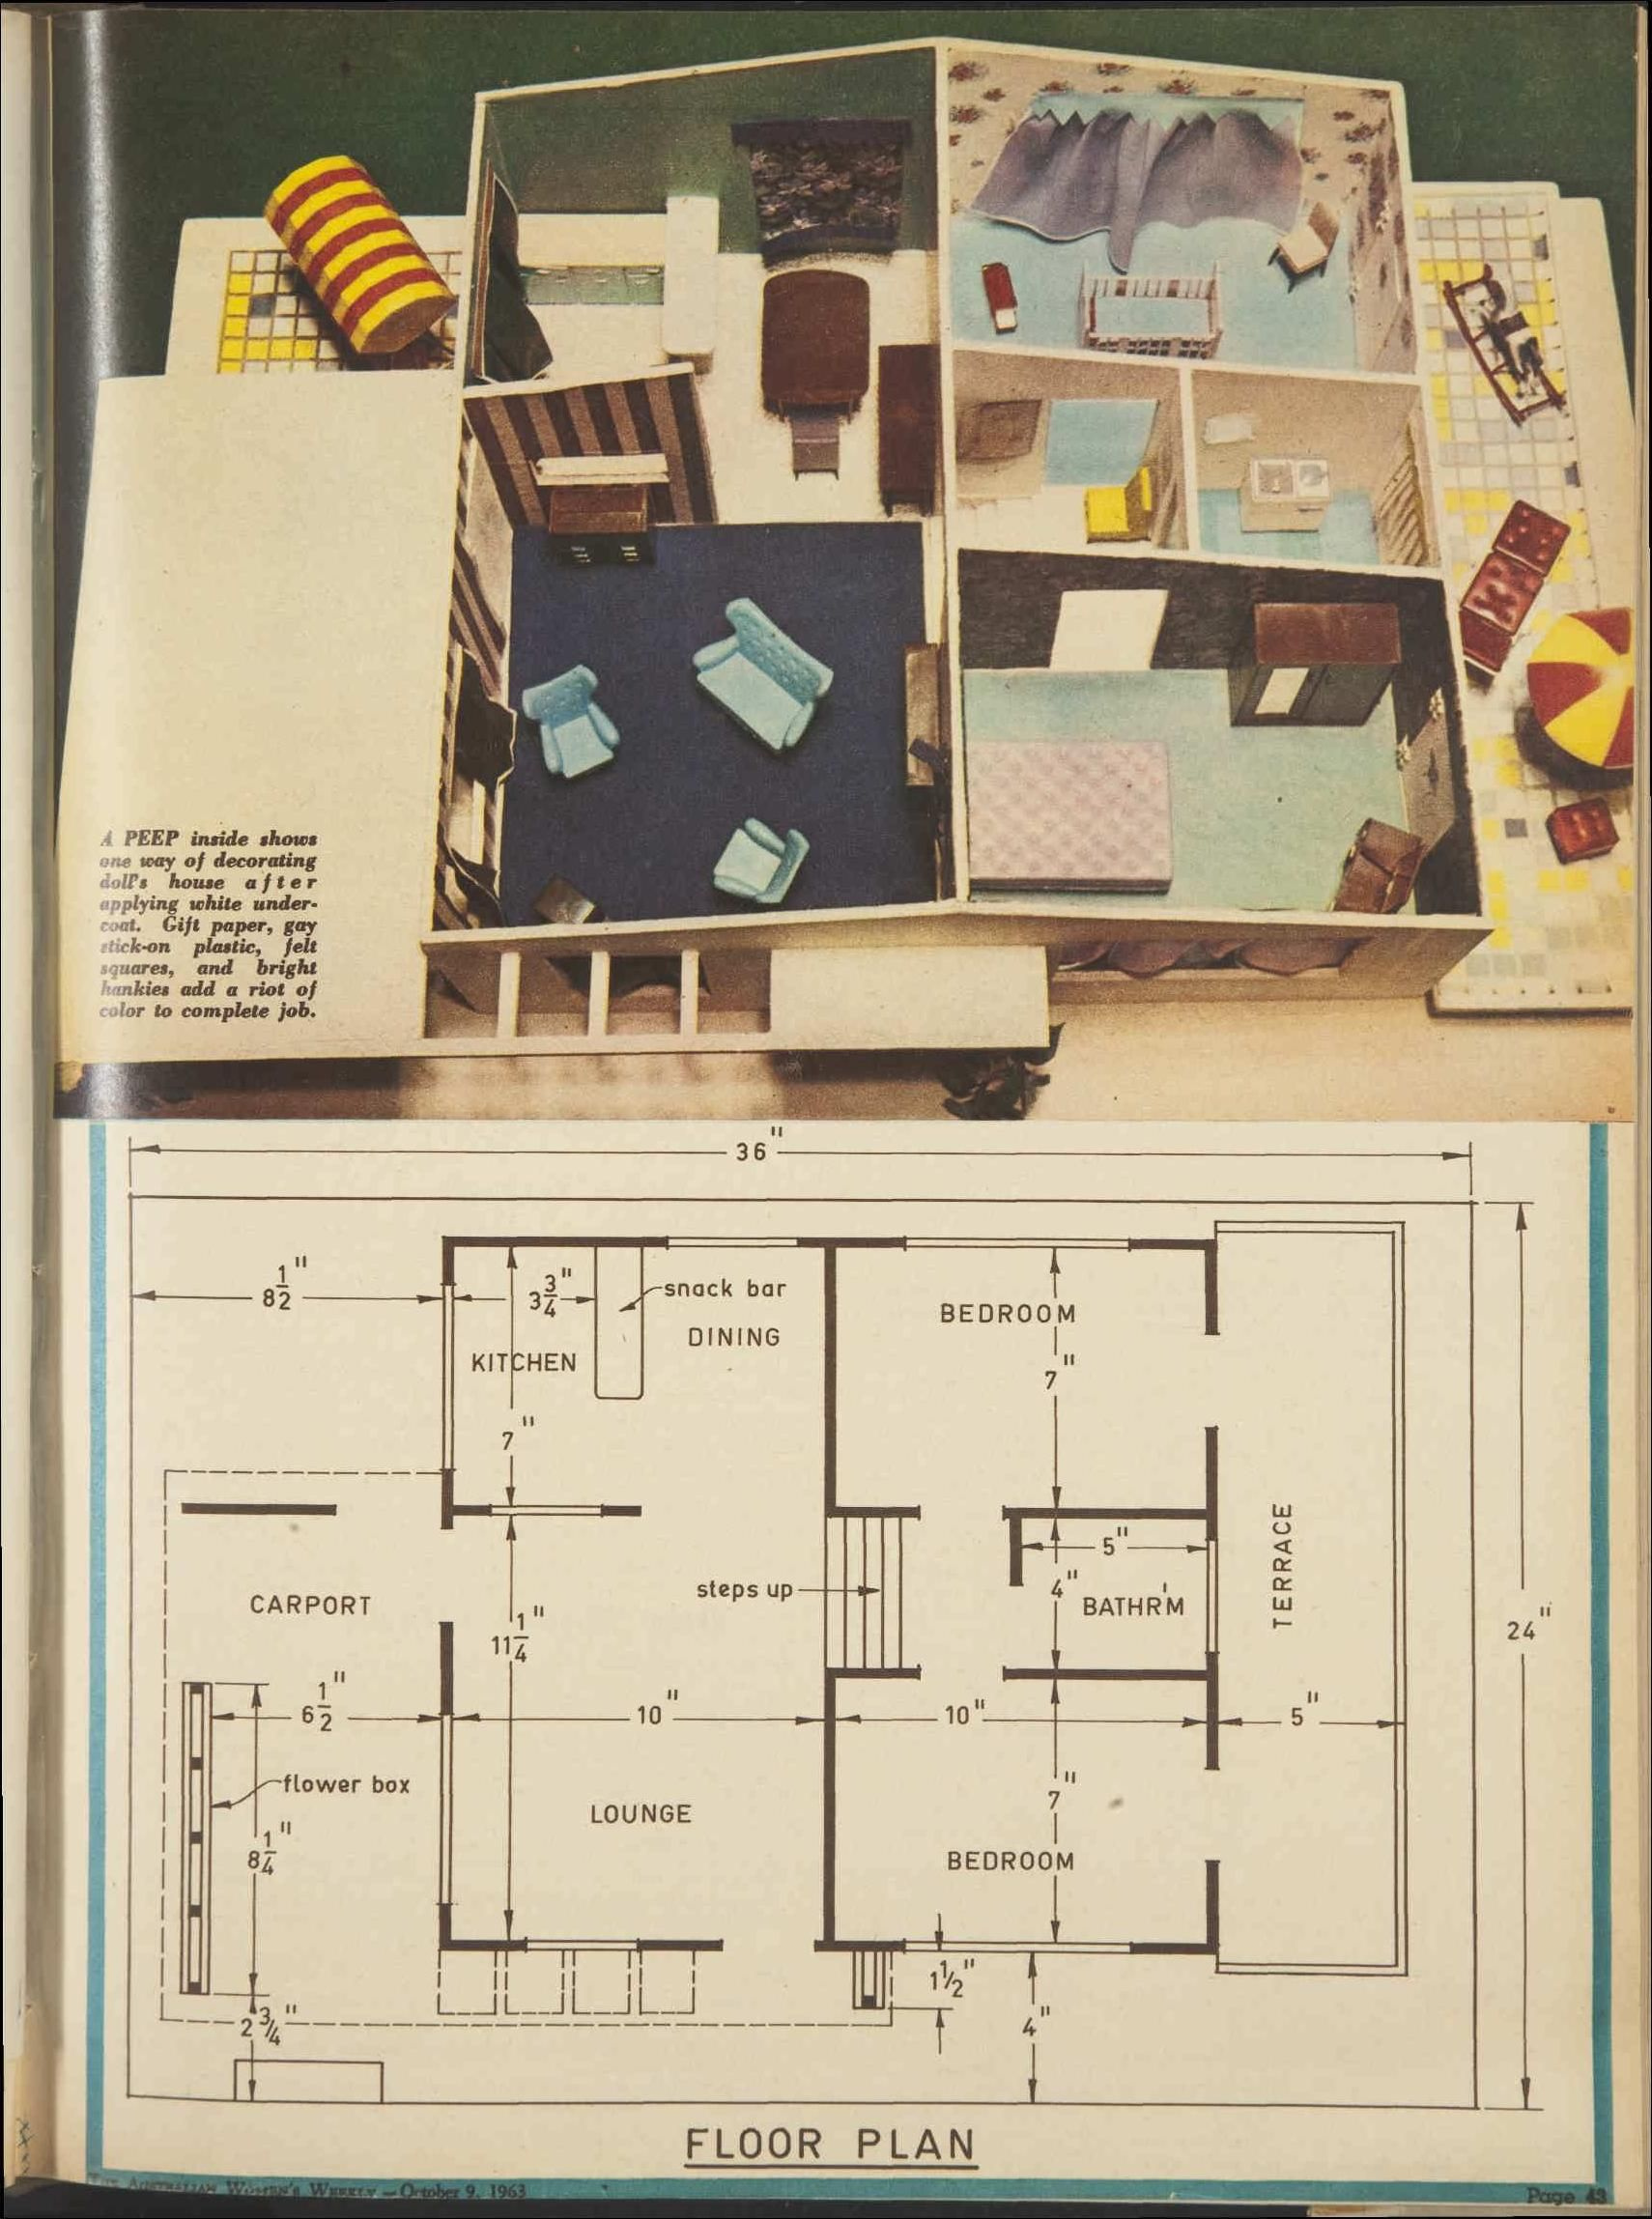 House Plan Plans For A Split level 1960s Doll s House 9 Oct 1963 The 